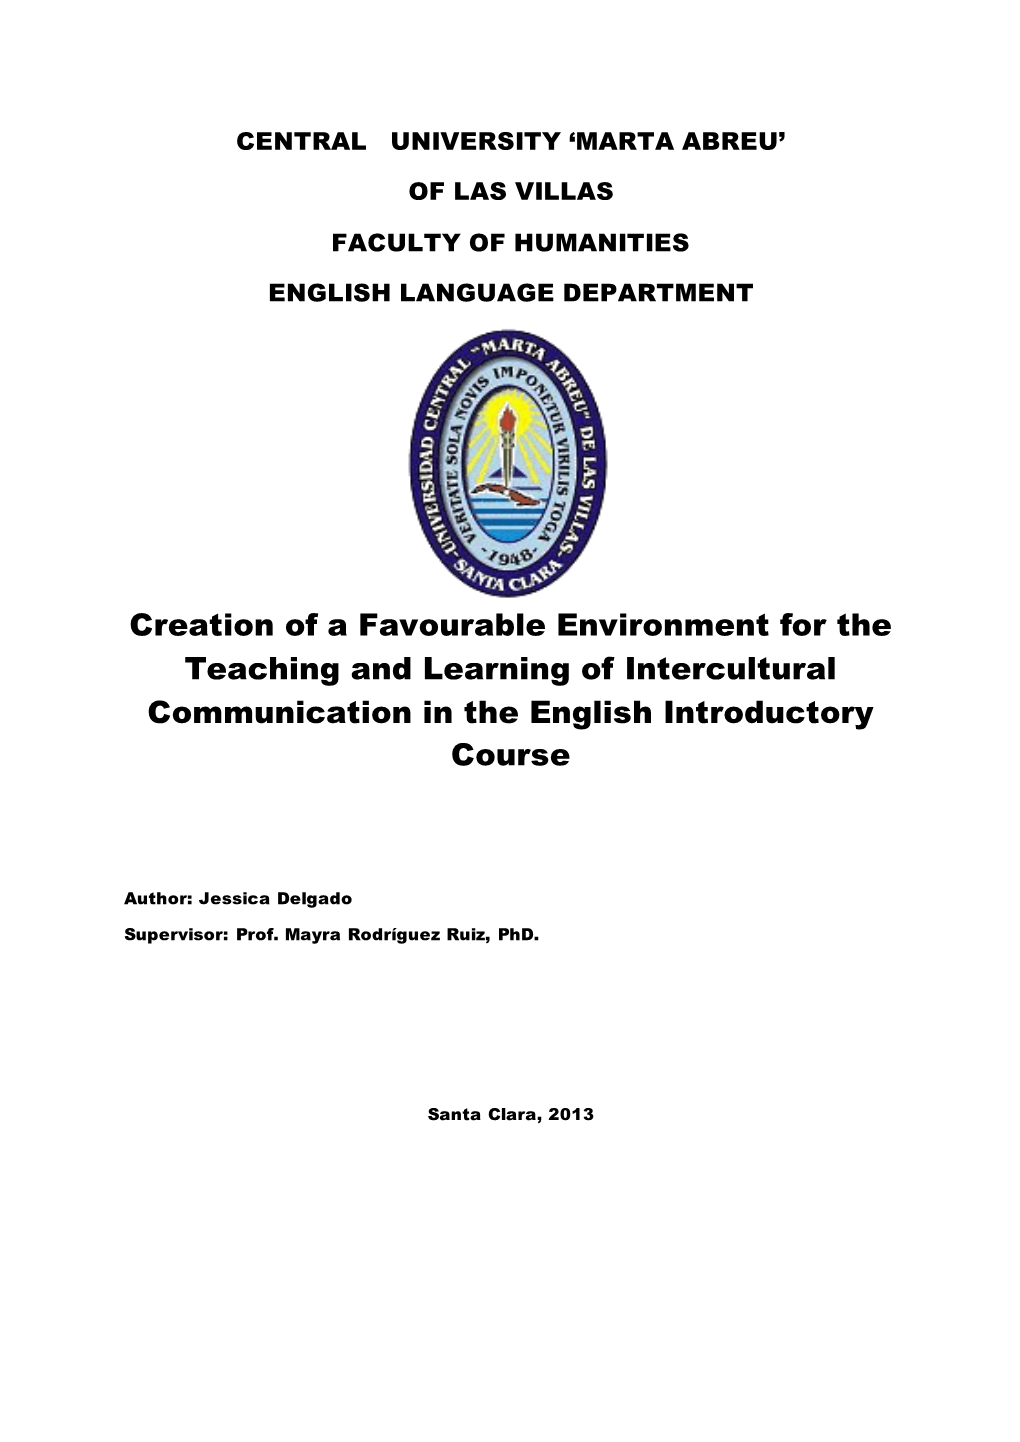 Creation of a Favourable Environment for the Teaching and Learning of Intercultural Communication in the English Introductory Course